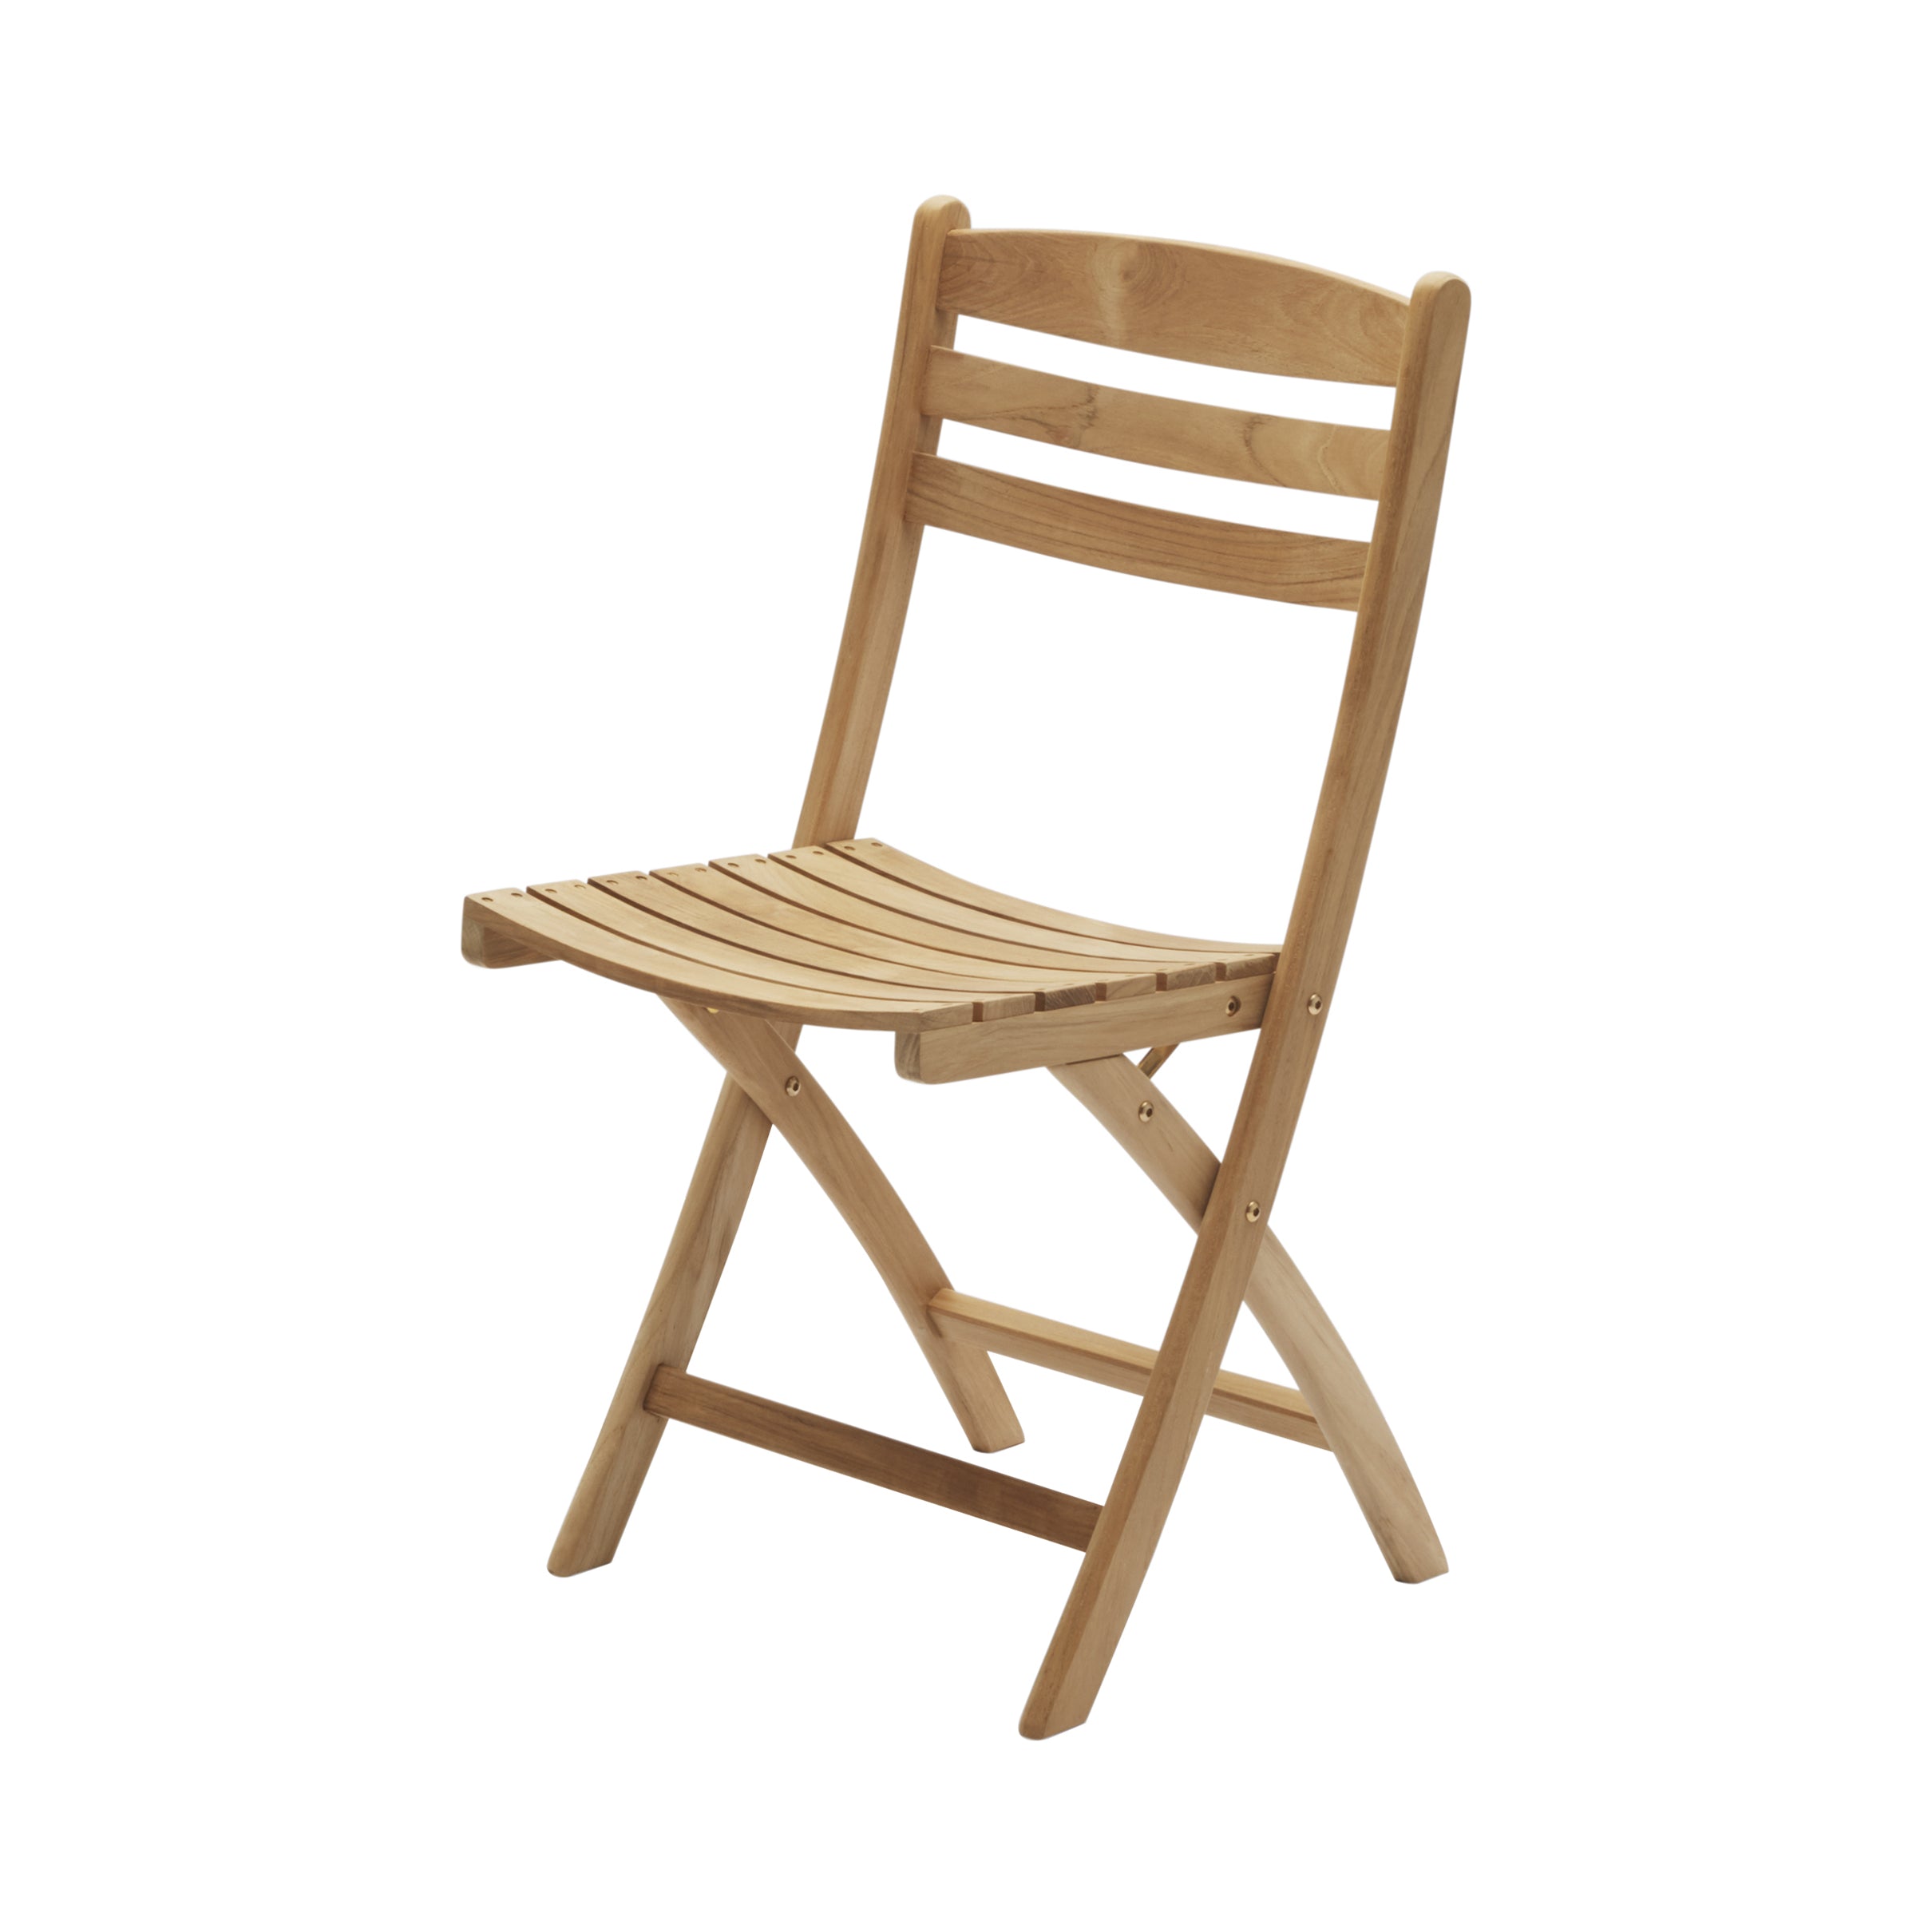 Selandia Chair: Without Cushion